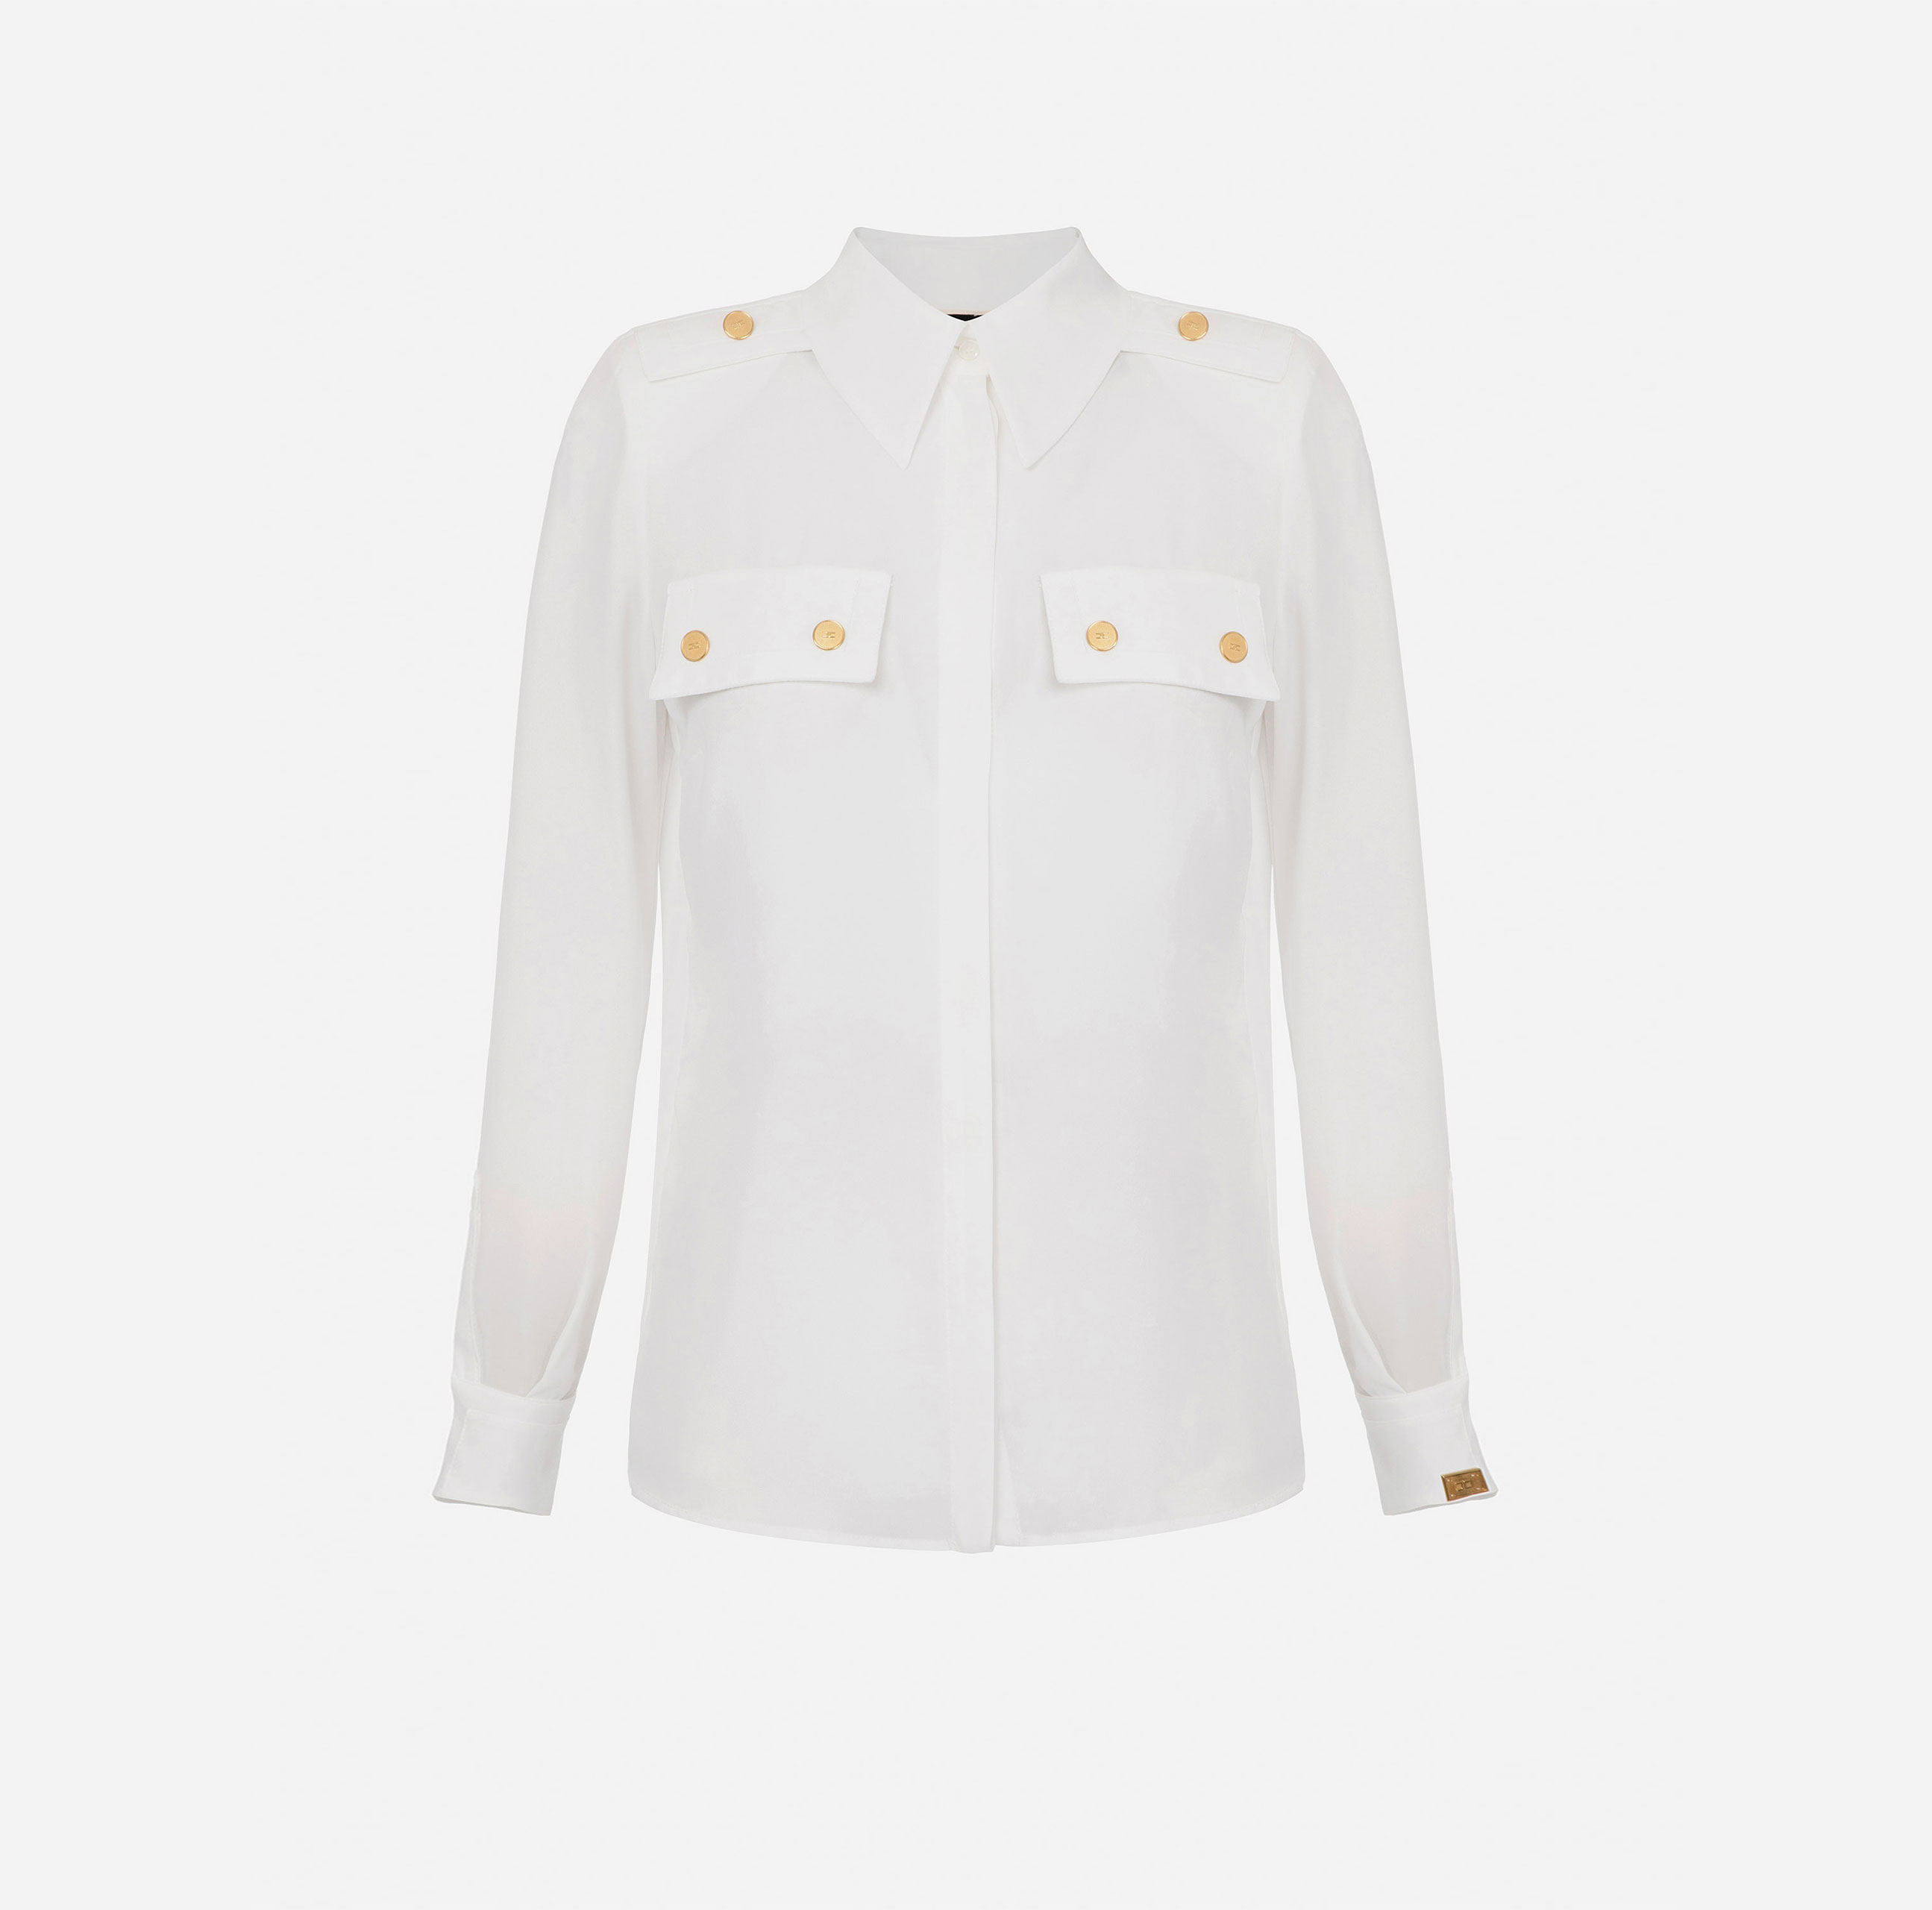 Shirt with flashes and pockets with flaps - ABBIGLIAMENTO - Elisabetta Franchi